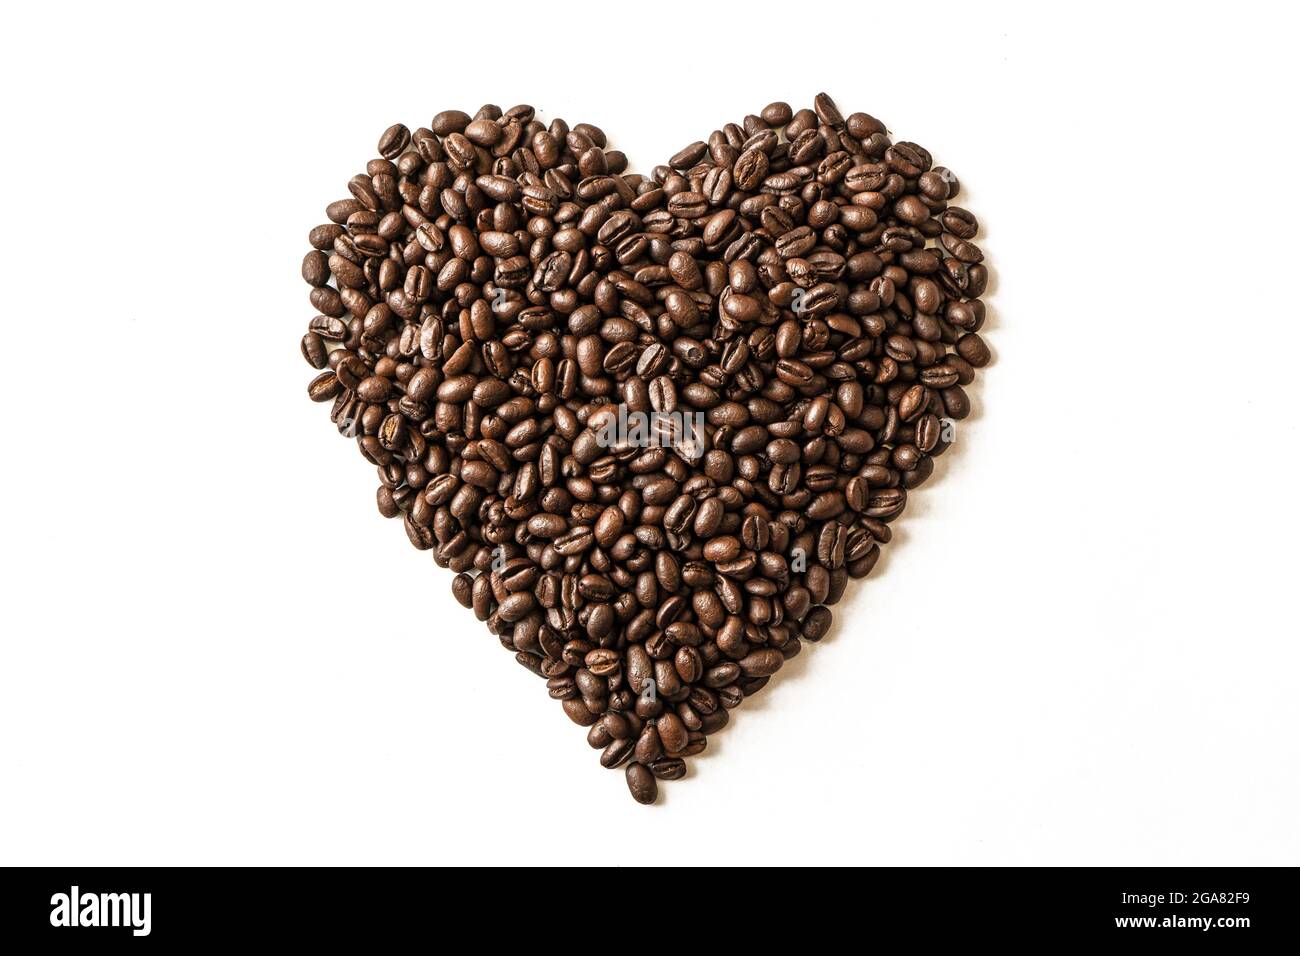 Coffee beans in shape of heart. A macro photo of fried brown coffee beans on the white table. Stock Photo